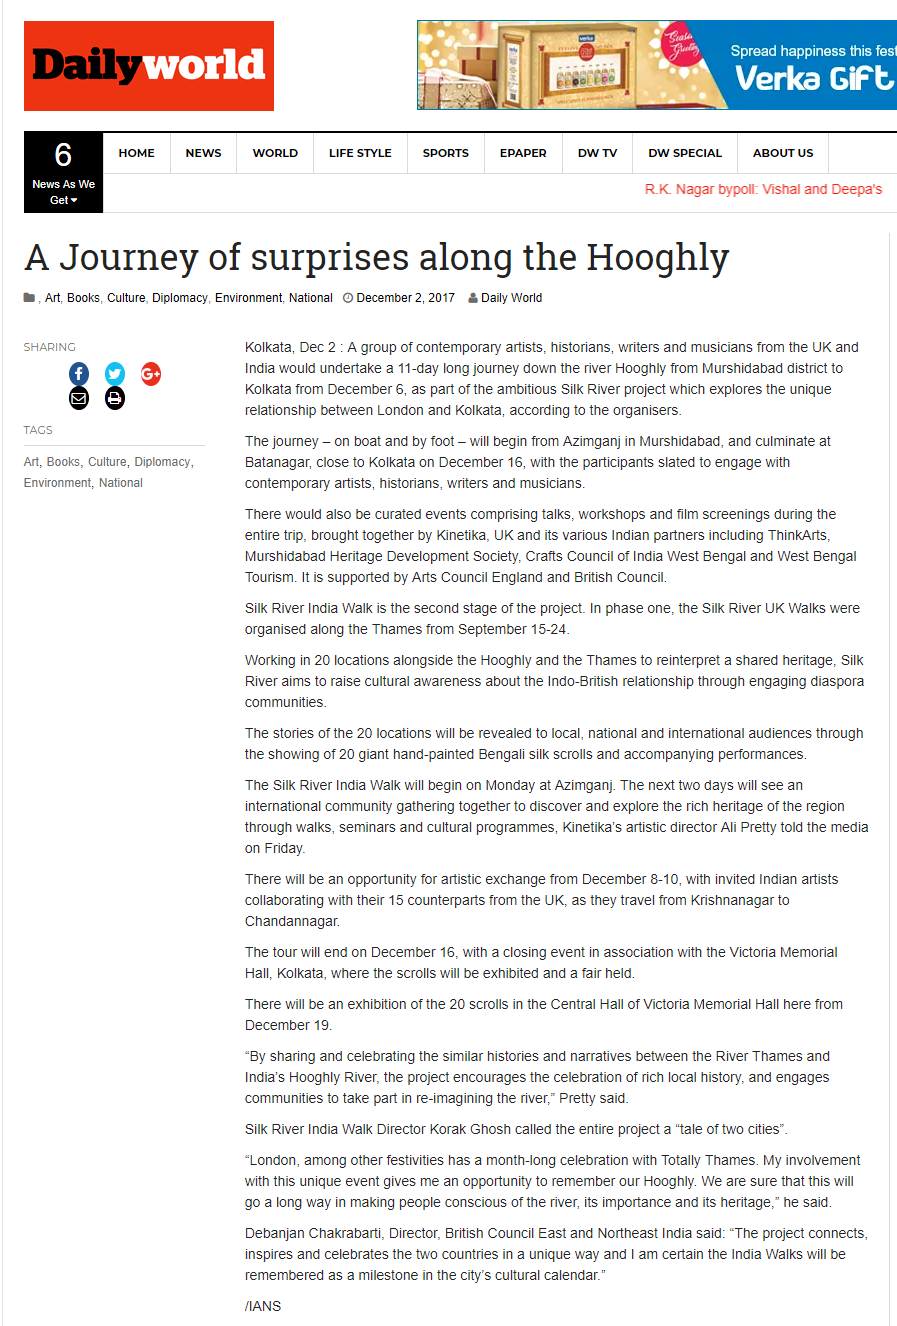 Daily World Article - A journey of surprises along the Hooghly